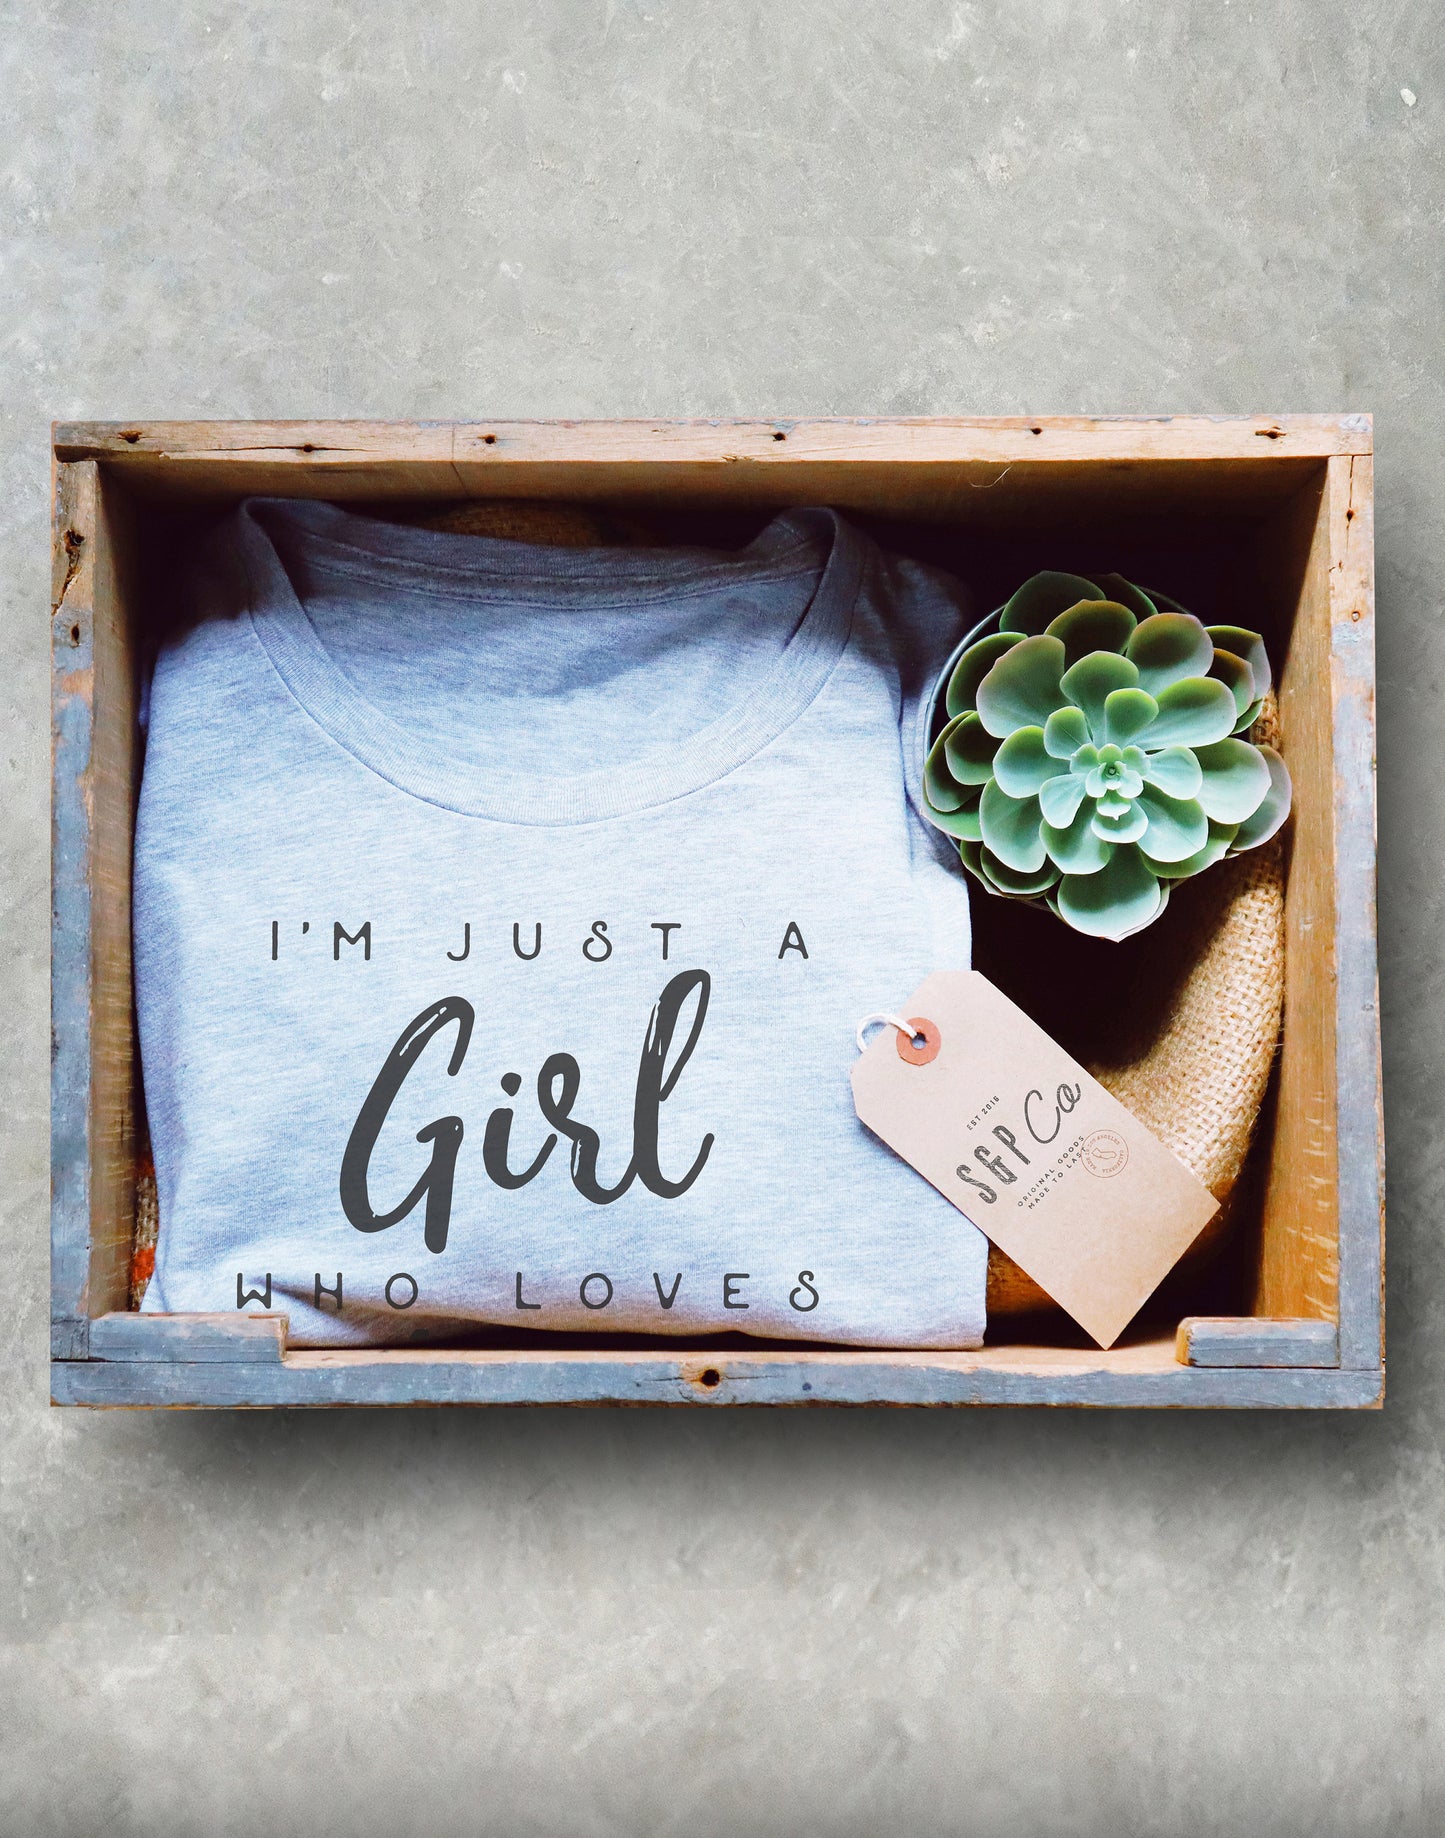 Horse Lover Gift - Just A Girl Who Loves Horses Unisex Shirt, Horse Riding T-Shirt, Equestrian Shirt, Equestrian Gift, Horseback Riding Tee